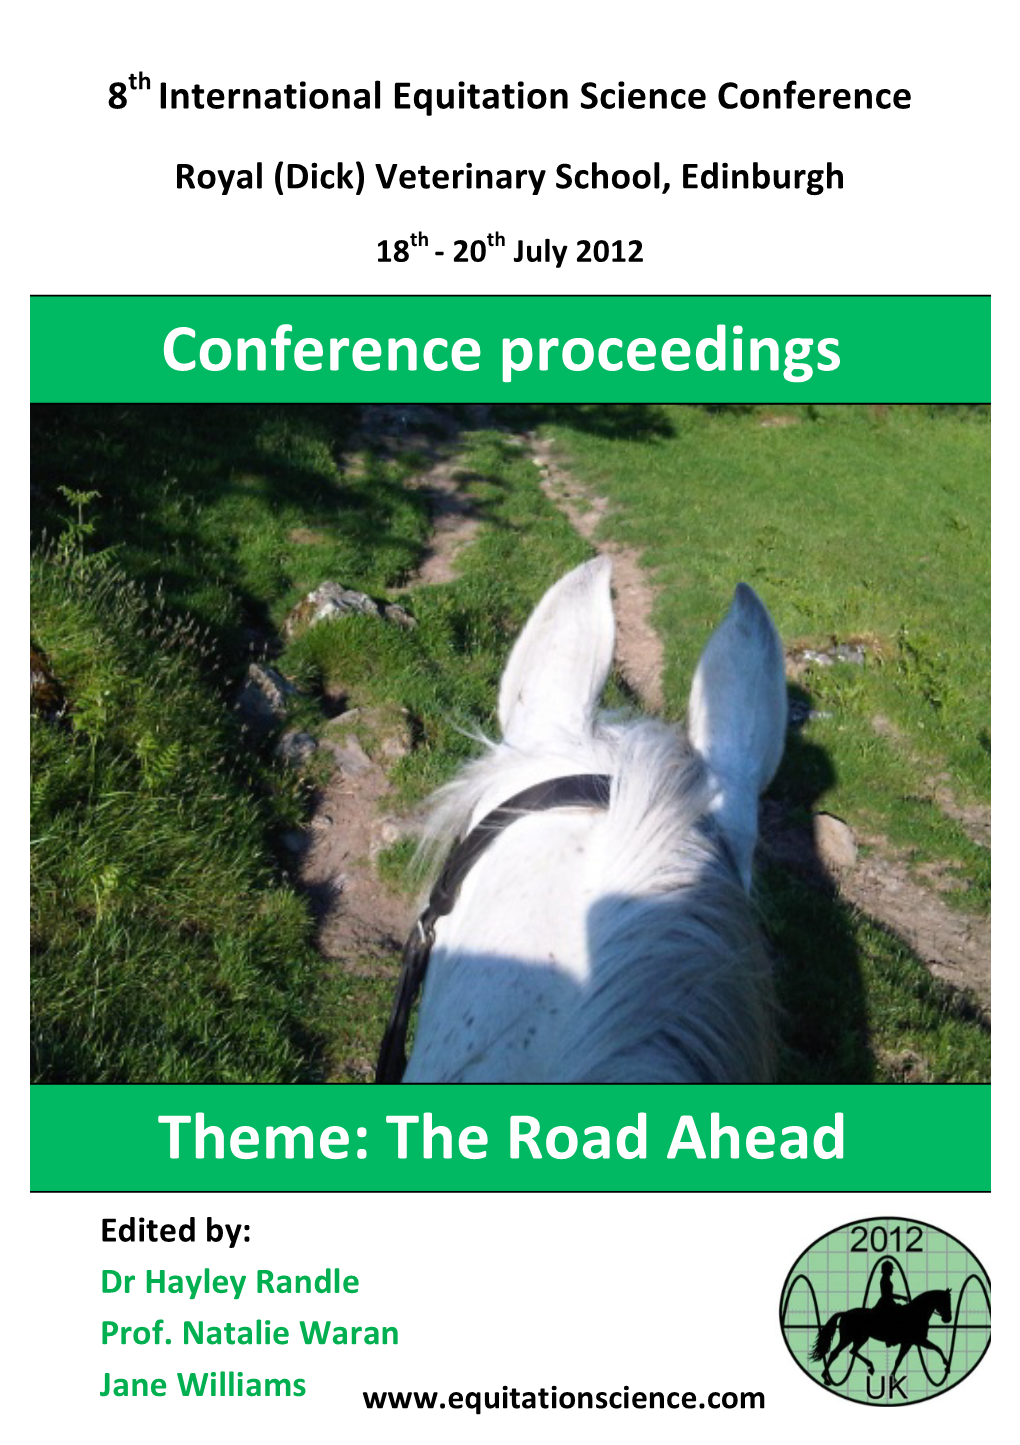 Conference Proceedings Theme